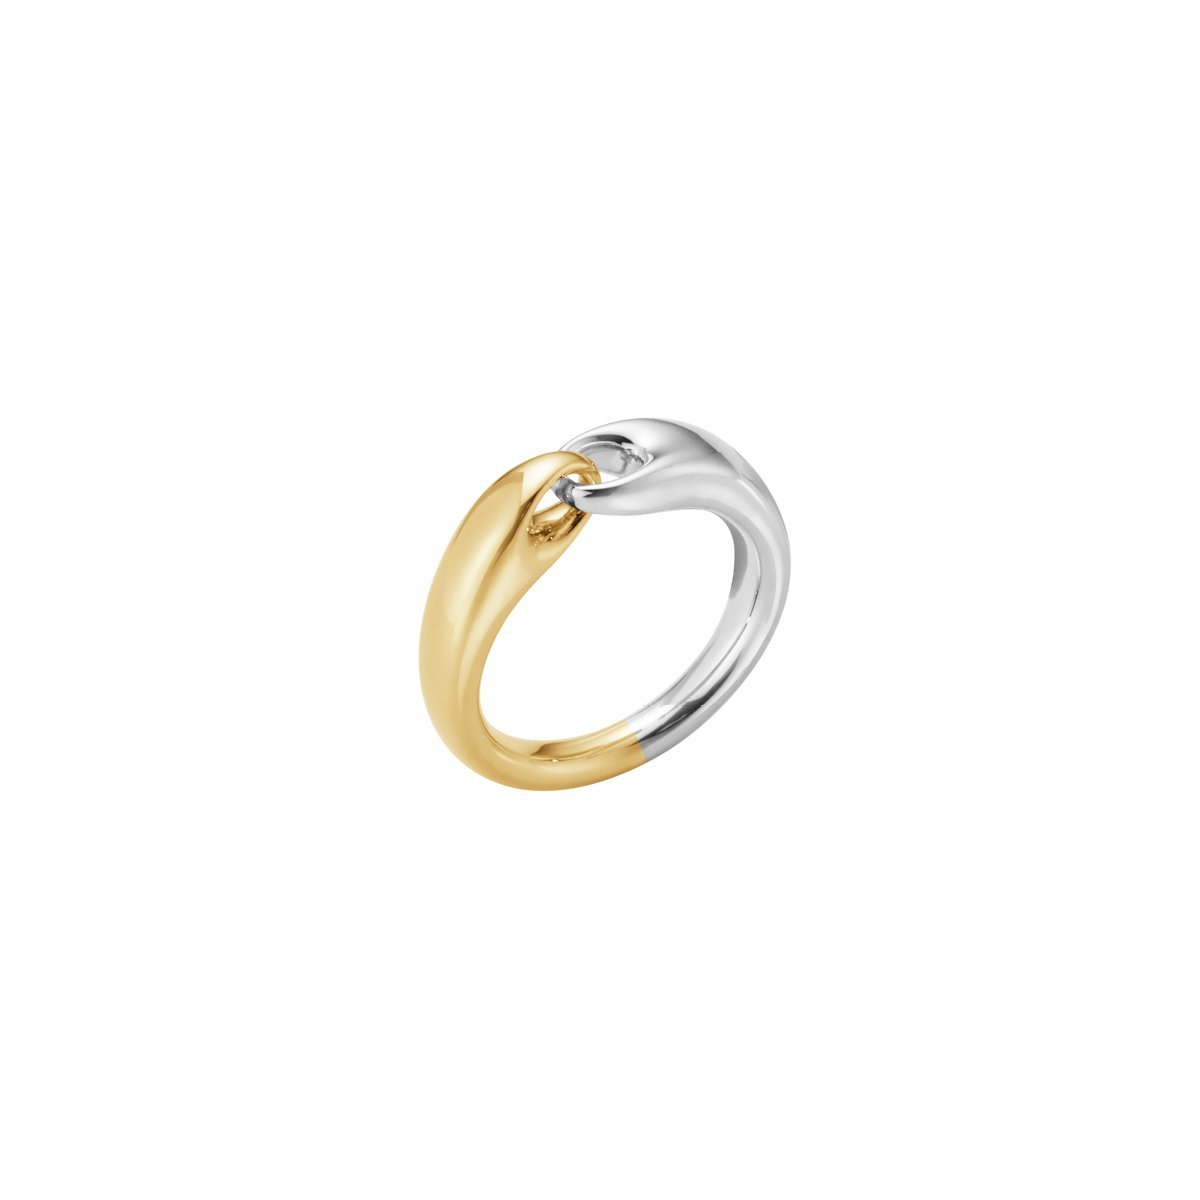 Reflect Silver and Yellow Gold Ring